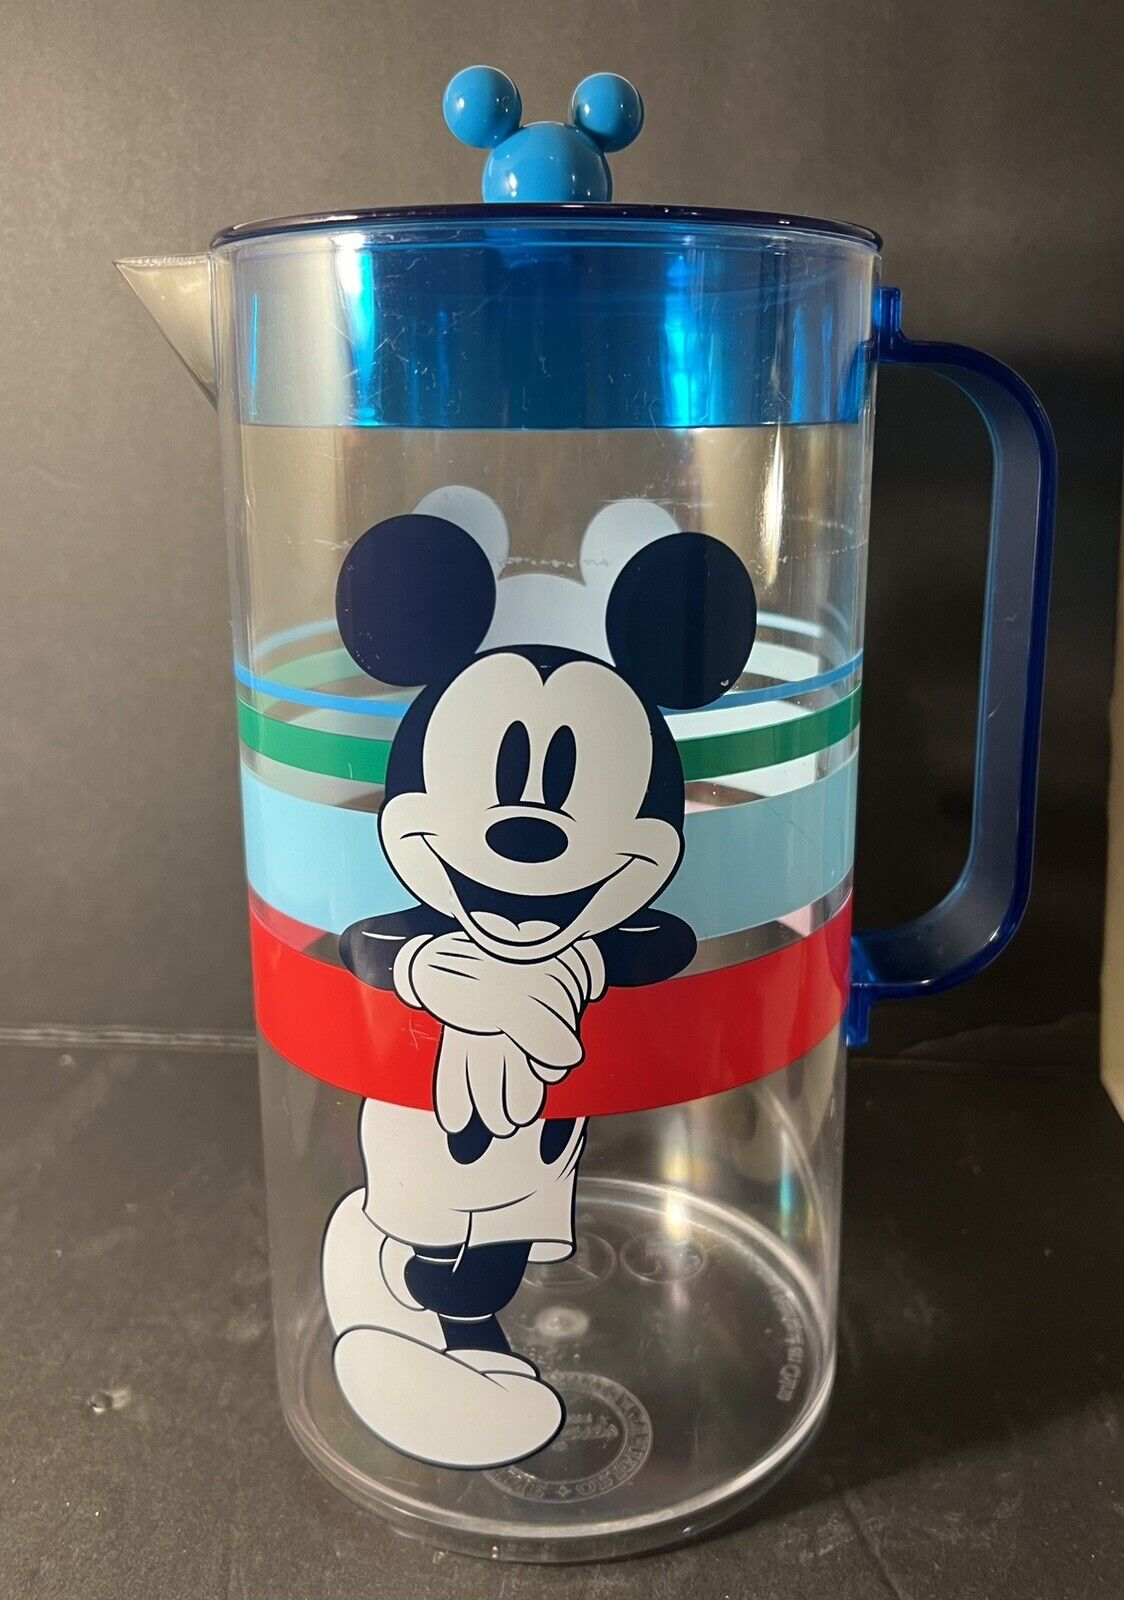 Vintage Disney Store Plastic Disneyland Pitcher, Mickey Mouse with Ears Lid.